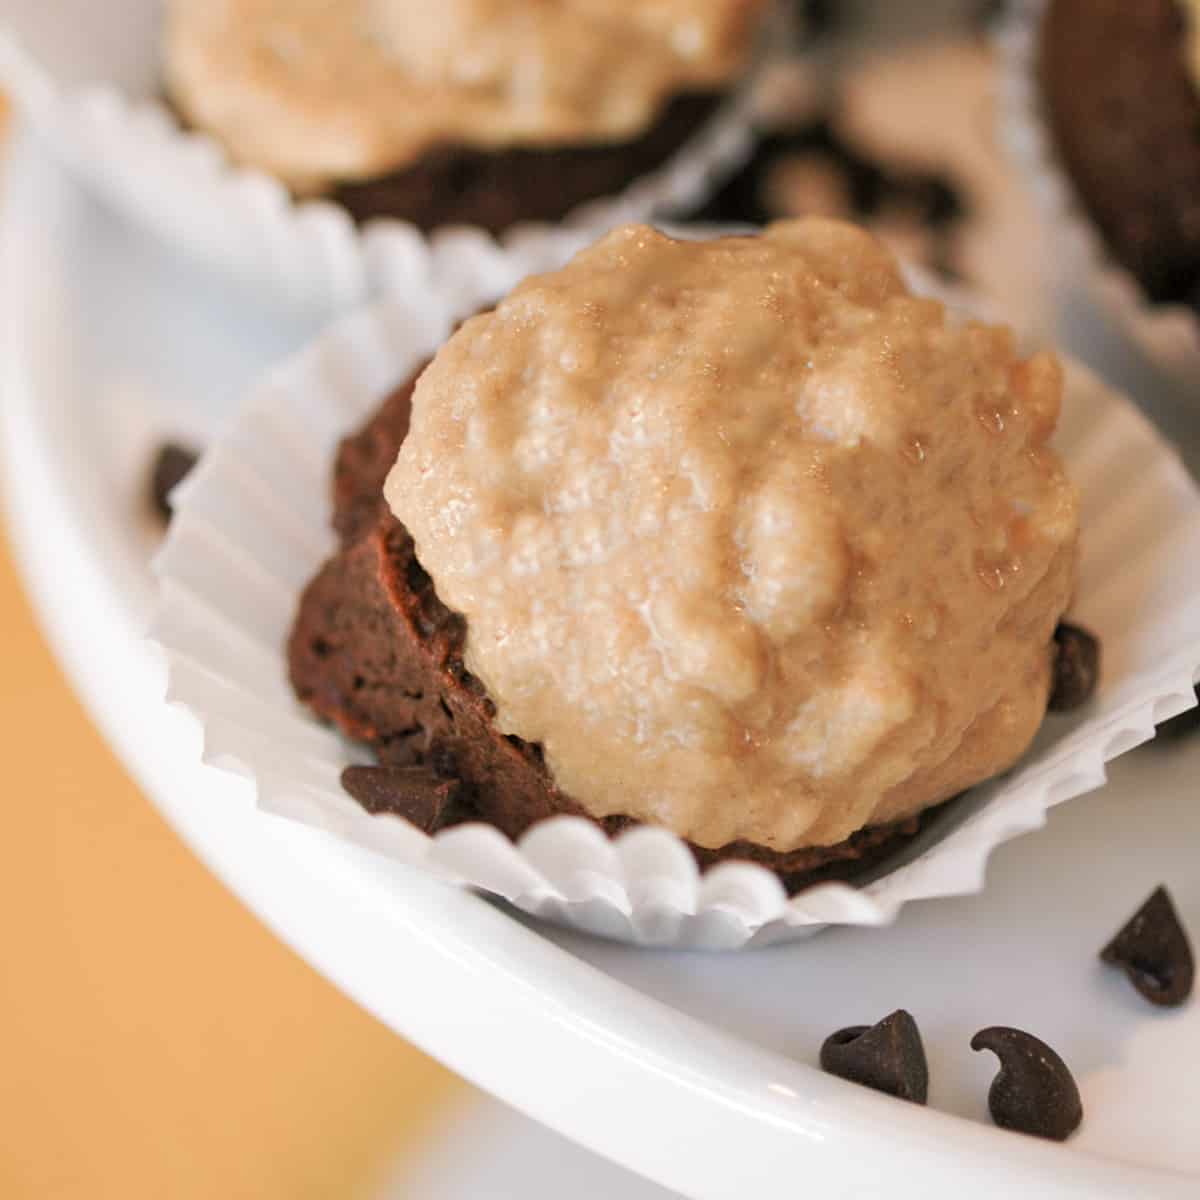 Chocolate with peanut butter cupcake cookies in a small cupcake wrapper on a white dish.